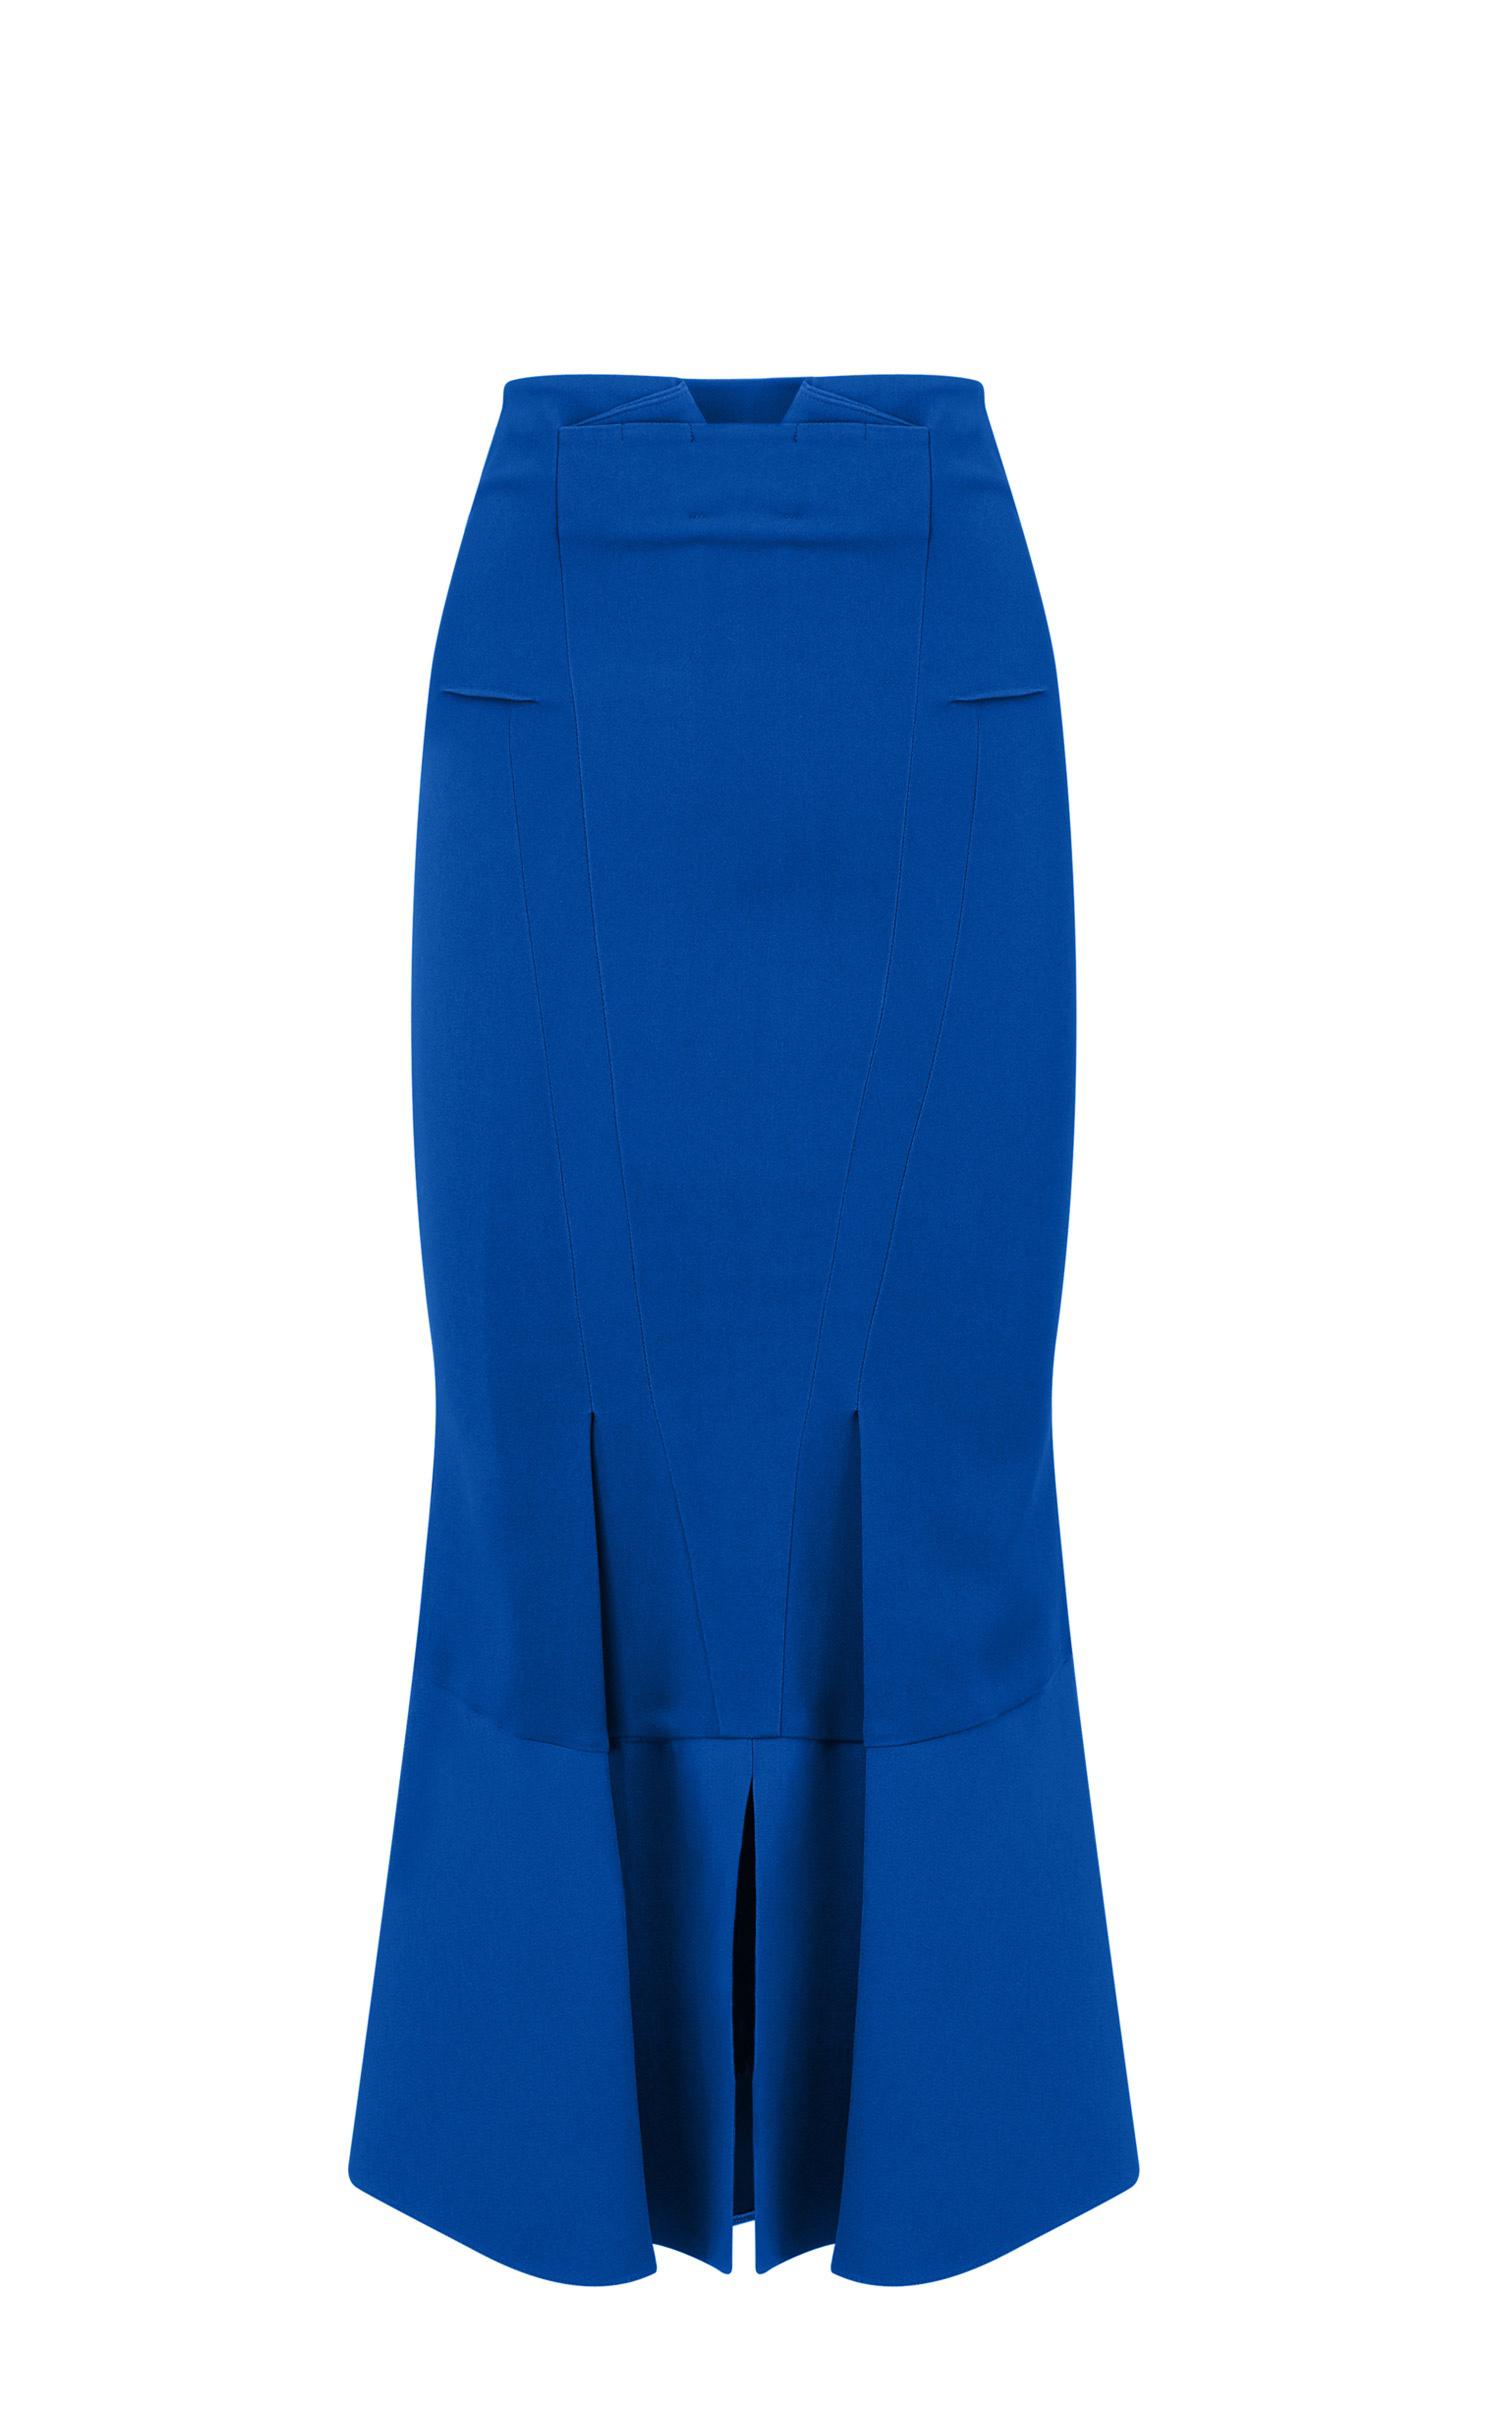 Lyst - Roland Mouret Firsoff Skirt in Blue